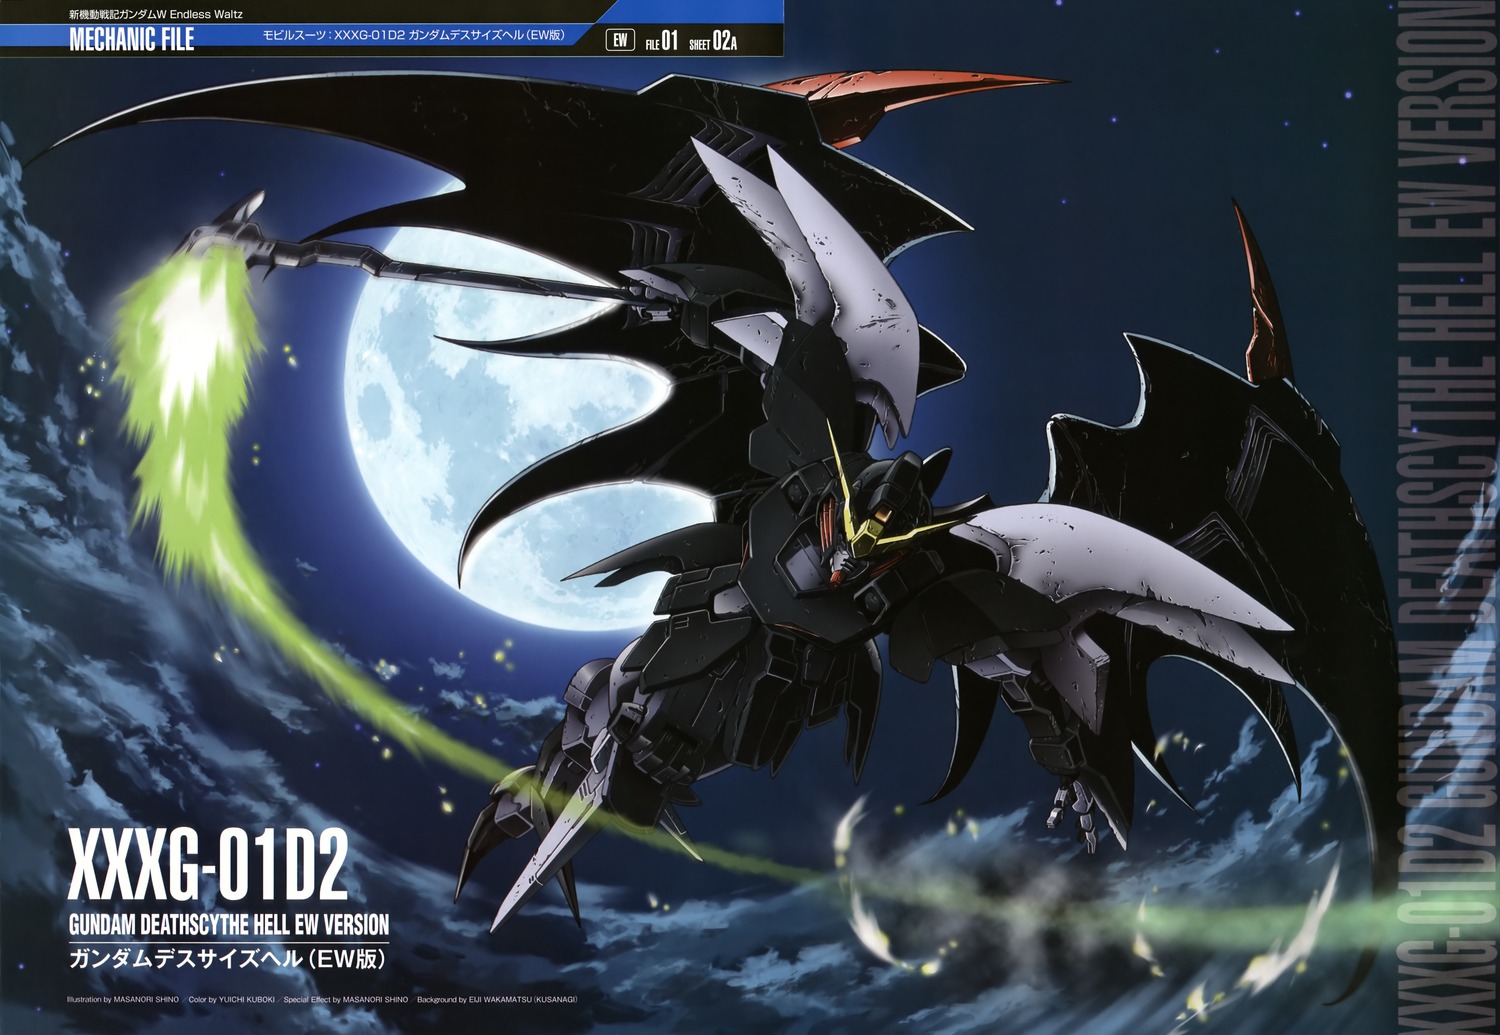 Free download Gundam Deathscythe Wallpaper at Movies Monodomo [1500x1035] for your Desktop, Mobile & Tablet. Explore Deathscythe Wallpaper. Deathscythe Wallpaper, Gundam Wing Deathscythe Wallpaper